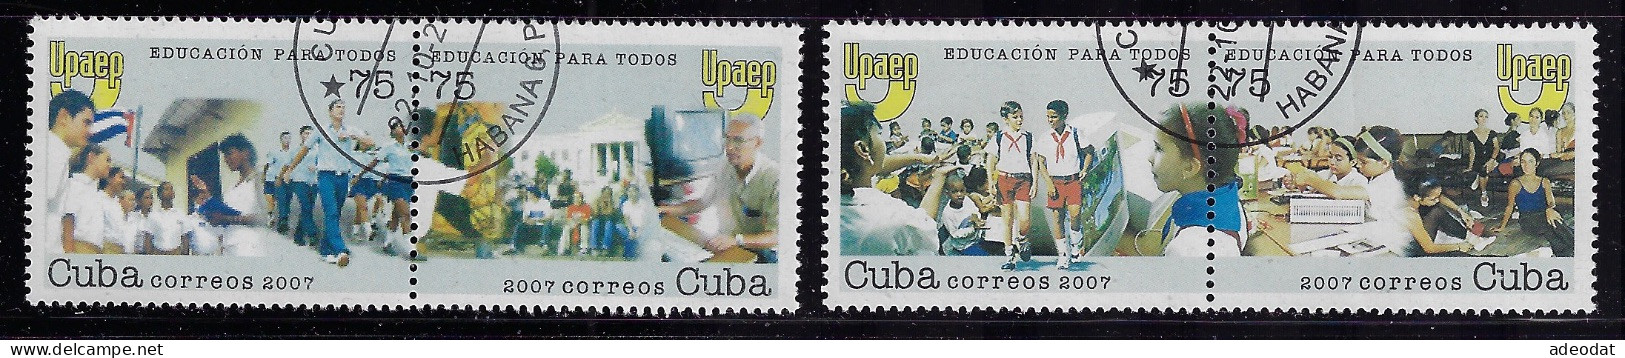 CUBA 2007 SCOTT 4785 CANCELLED - Used Stamps